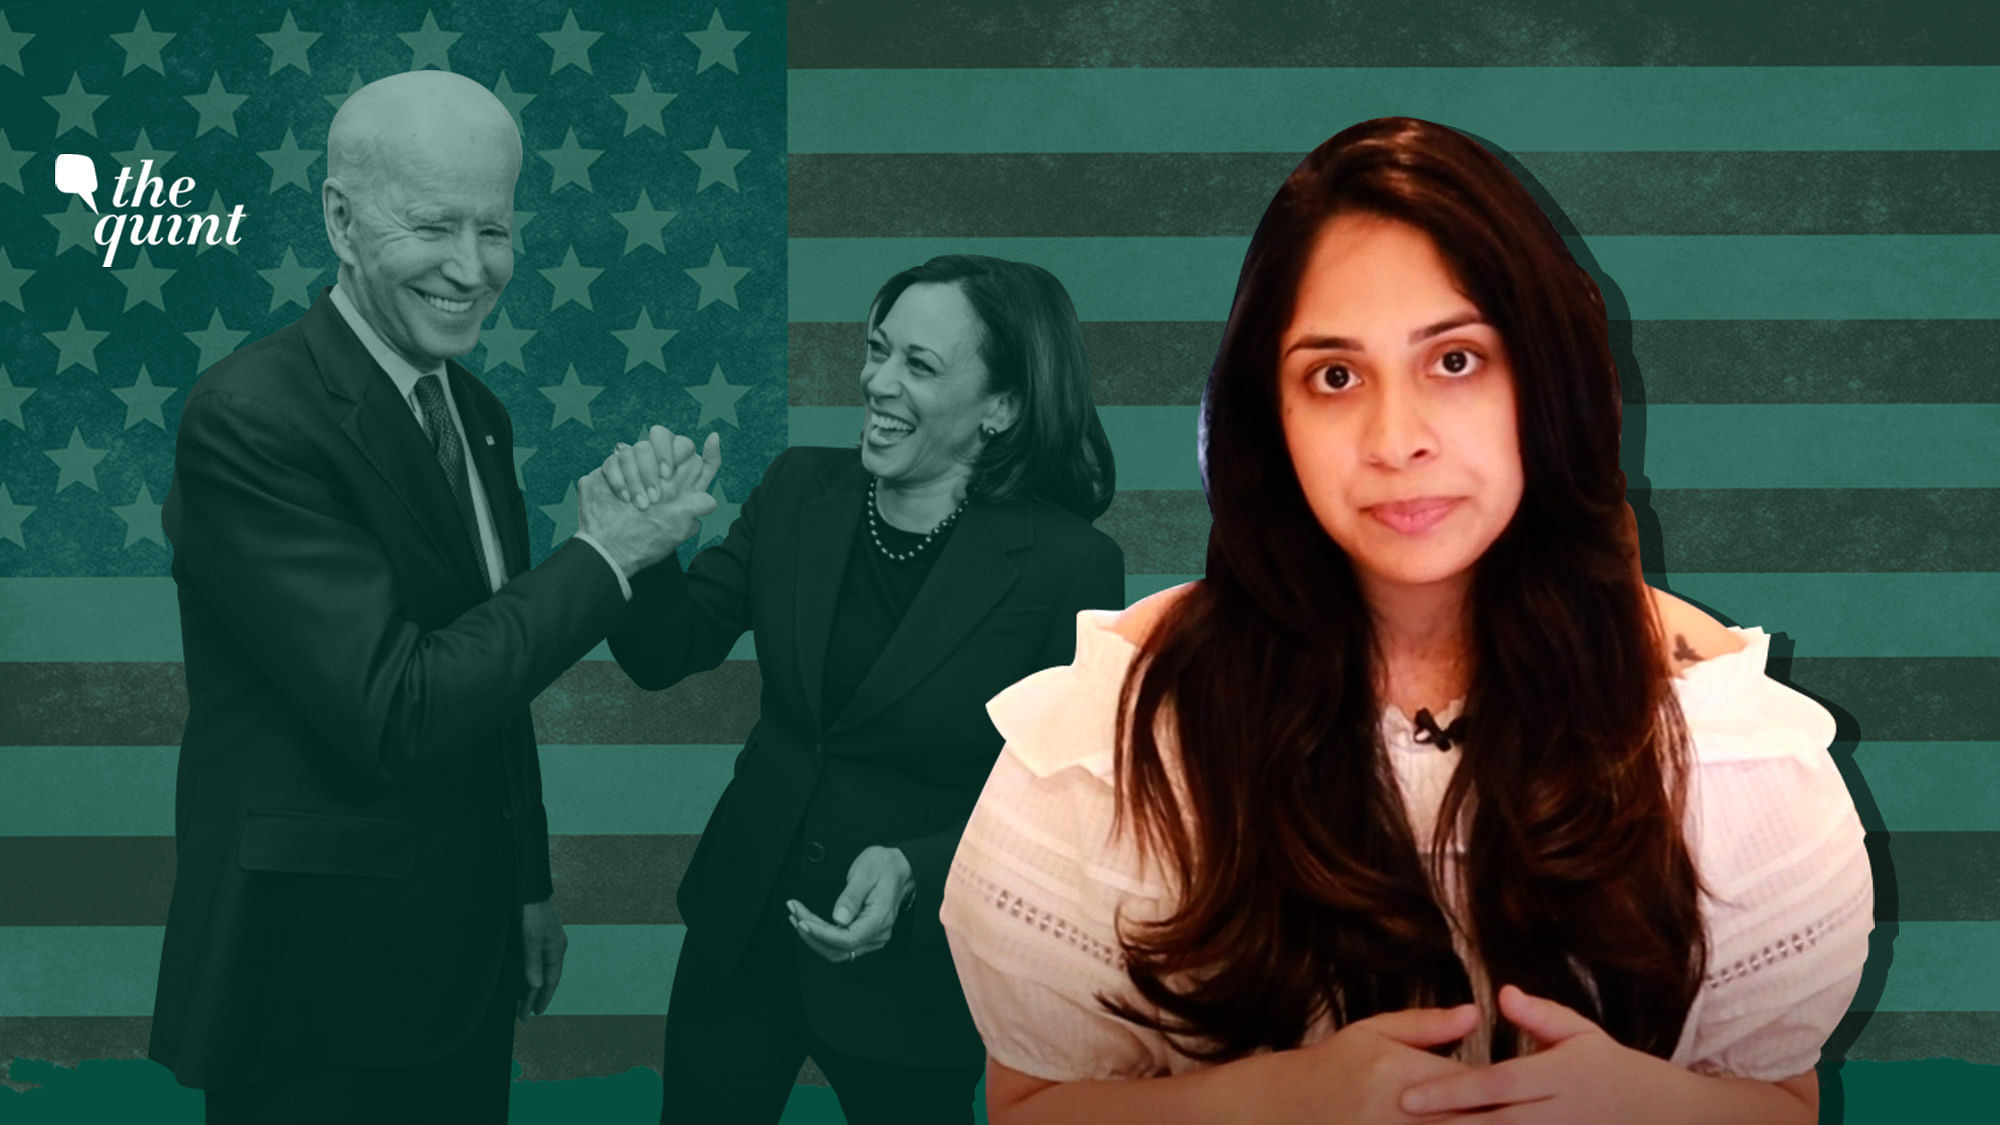 Joe Biden has chosen Kamala Harris as his running mate for the 2020 Presidential elections. If they’re elected, she would serve as the Vice President while he would be elected as the President.